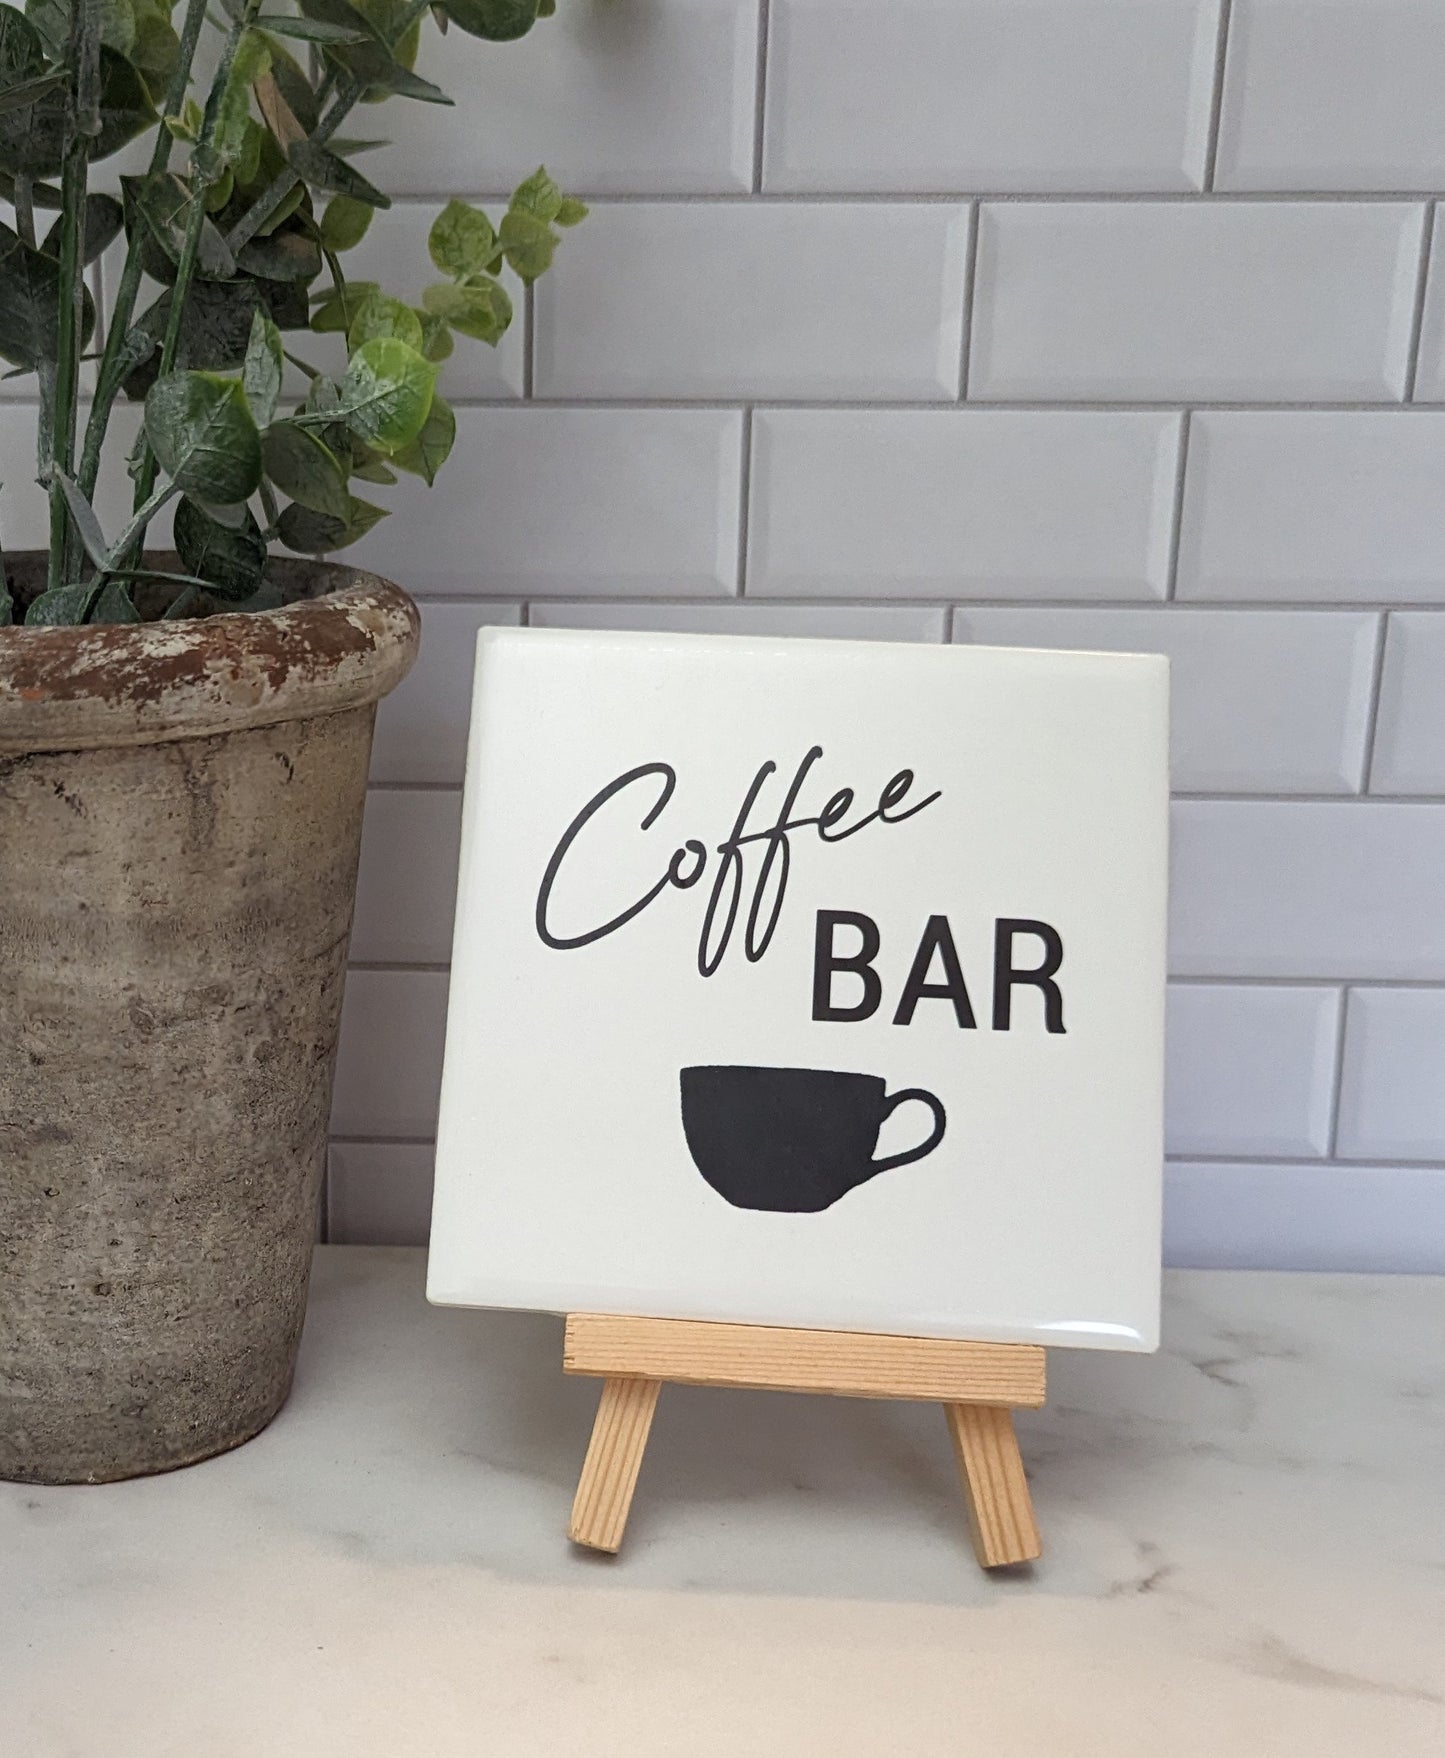 If you love me you'll bring me coffee sign, easel sign, fresh brewed coffee tile sign - easel included, your color choice